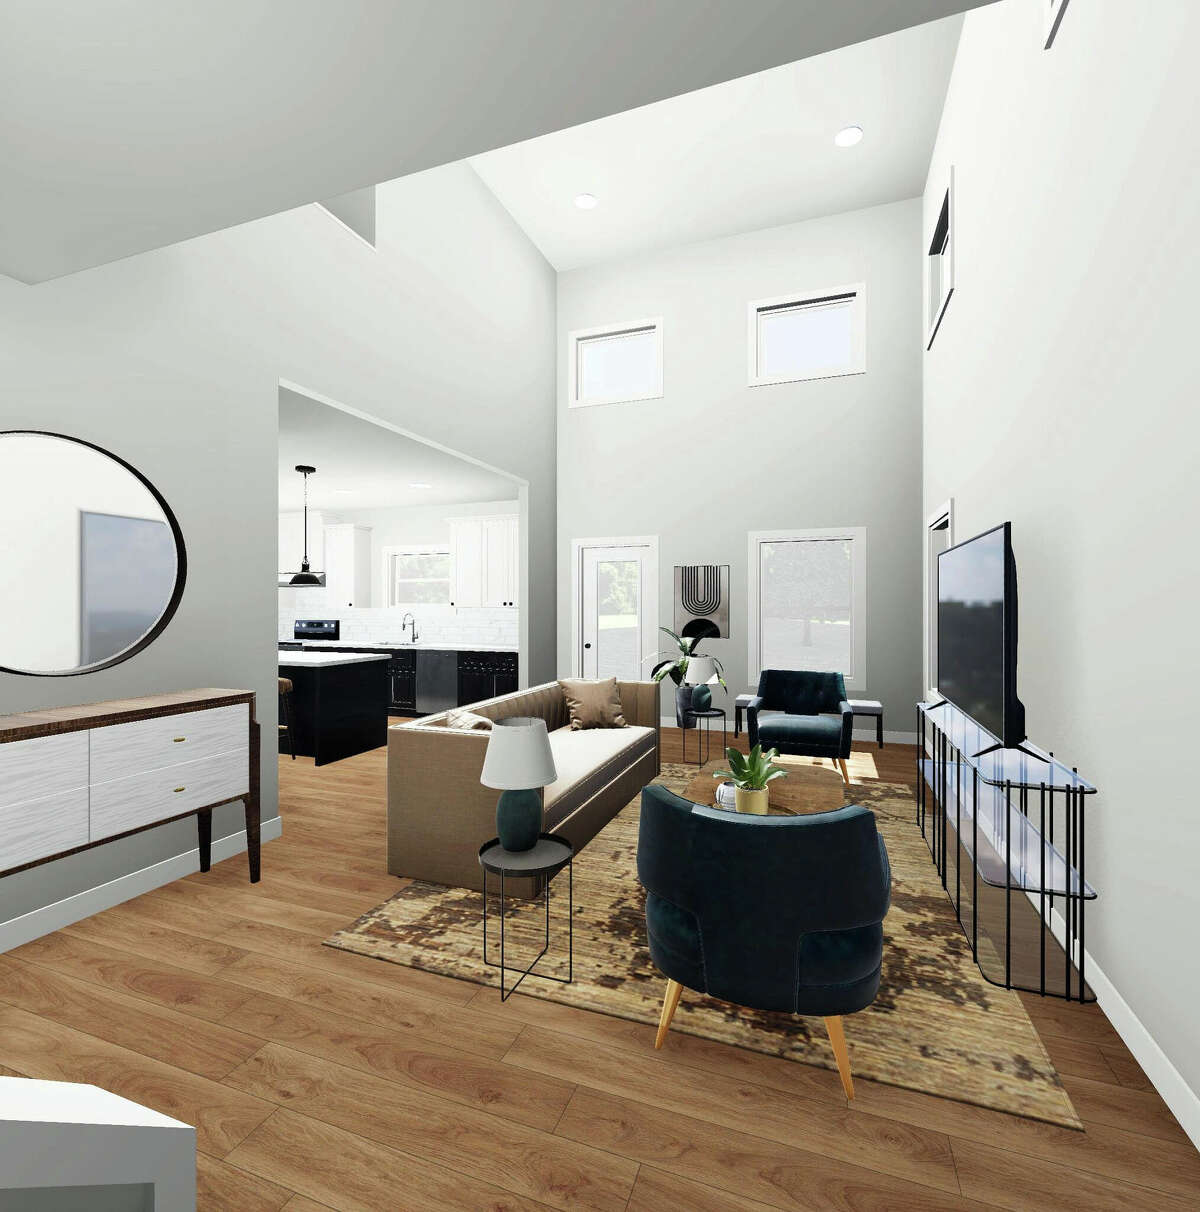 An interior rendering of a possible design plan for the terrace homes, Benton Place. Prices start in the $600,000 range.